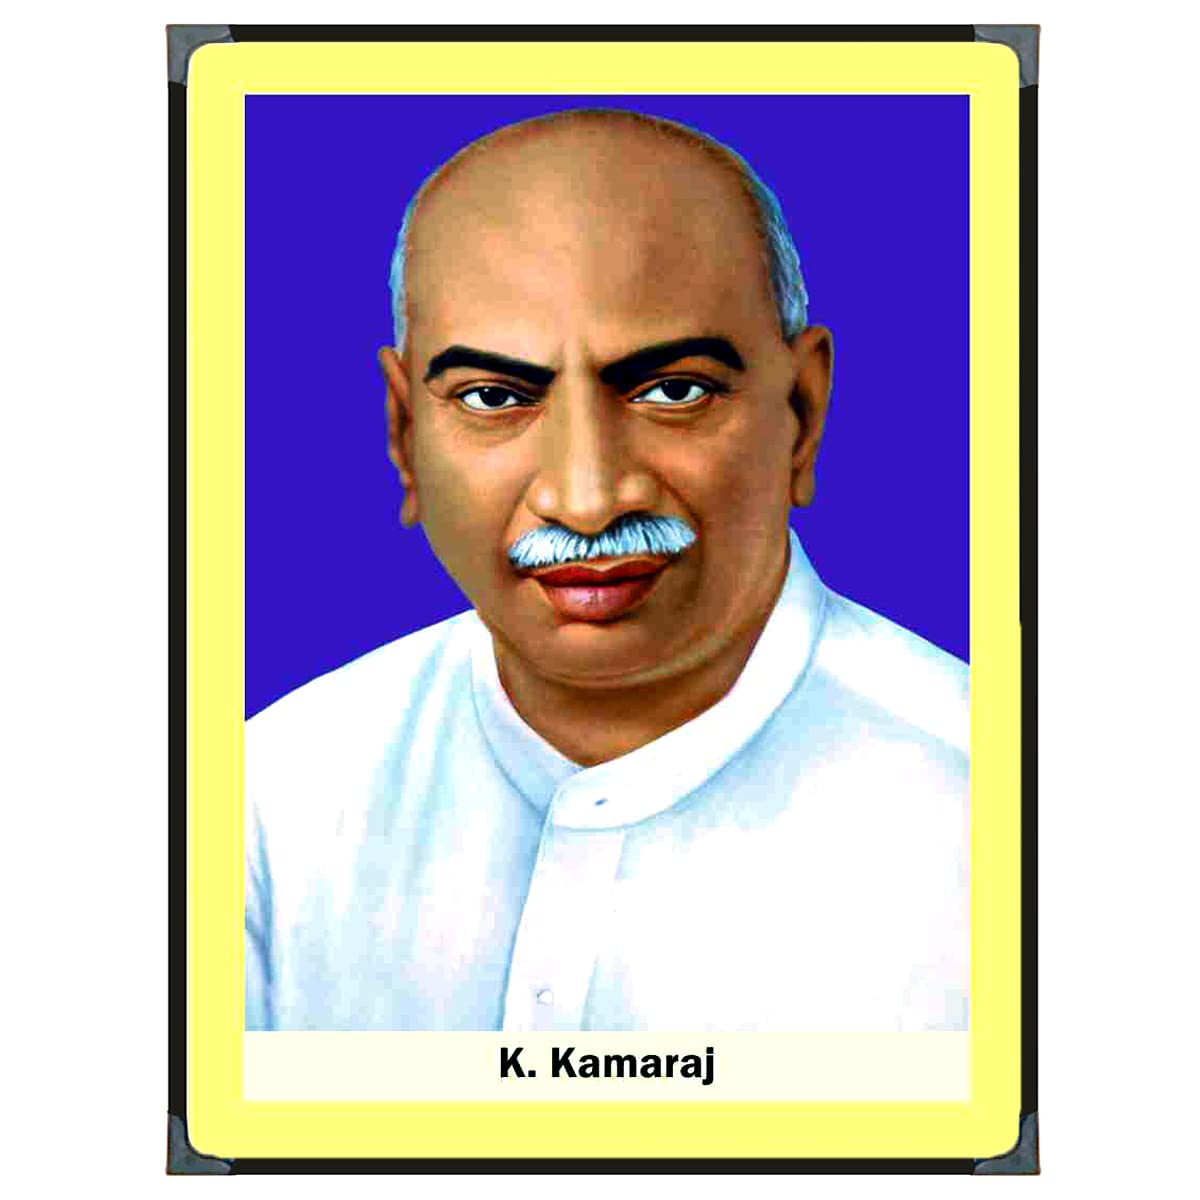 High Definition Photo And Wallpapers: hd kamarajar wallpapers,hd kamarajar  images,hd kamarajar photos,hd kamarajar stils gallary, hd kamarajar photo  gallary,hd kamarajar pictures,hd kamarajar pics,hd kamarajar wallpaper,hd  kamarajar imge,hd kamarajar ...